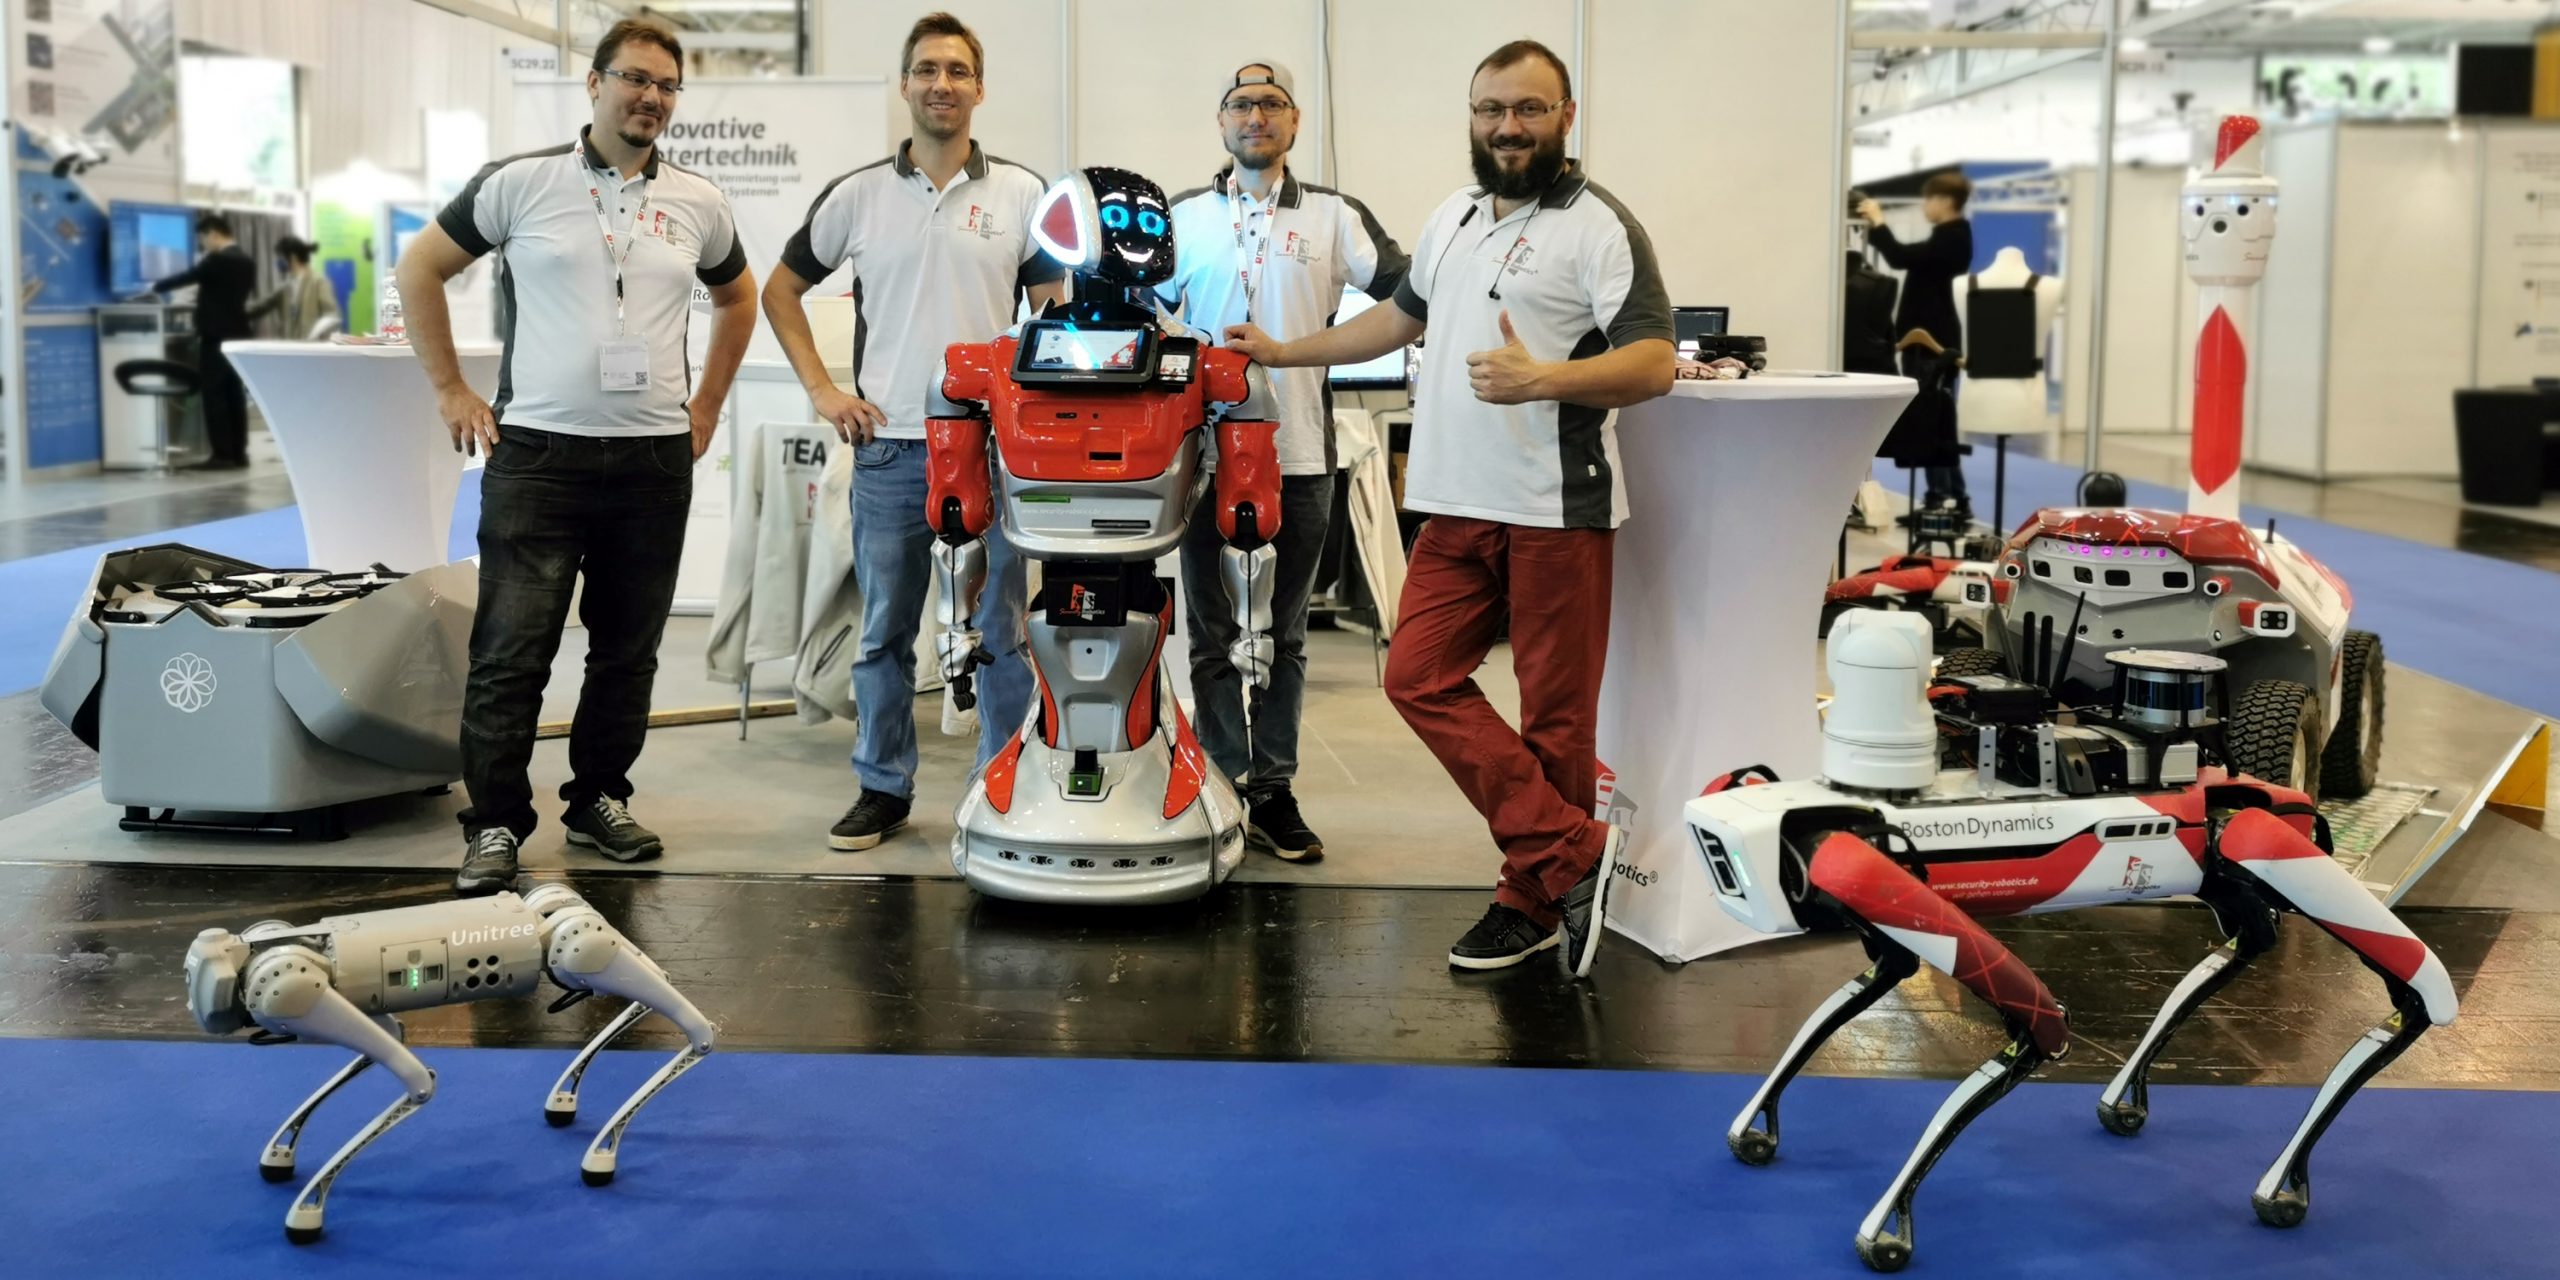 More from and about the Security Robotics team: People and robots